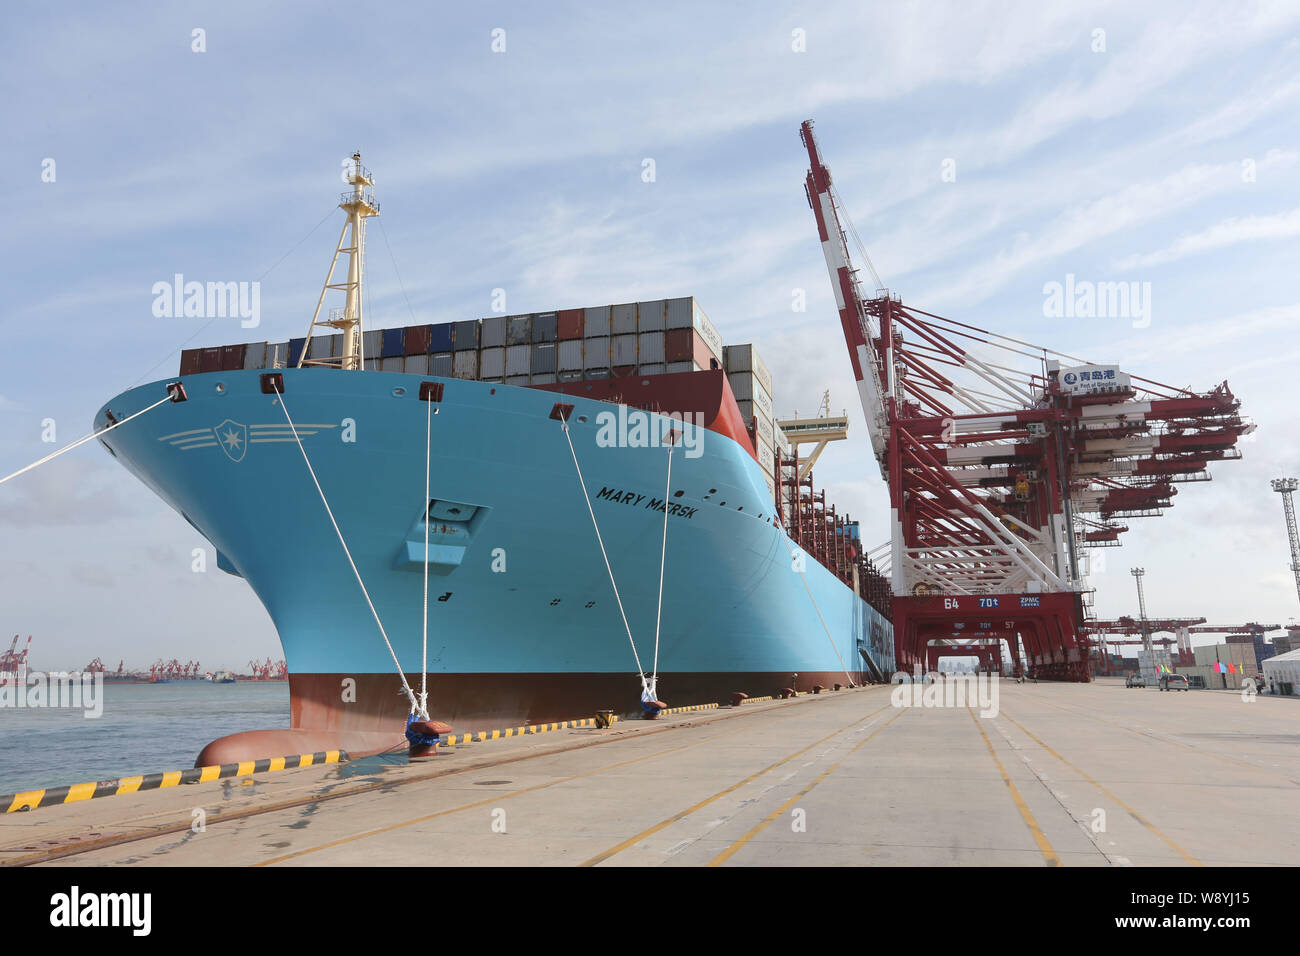 --FILE--The Mary Maersk container ship of Maersk Line docks at the Port of Qingdao in Qingdao city, east Chinas Shandong province, 18 September 2013. Stock Photo